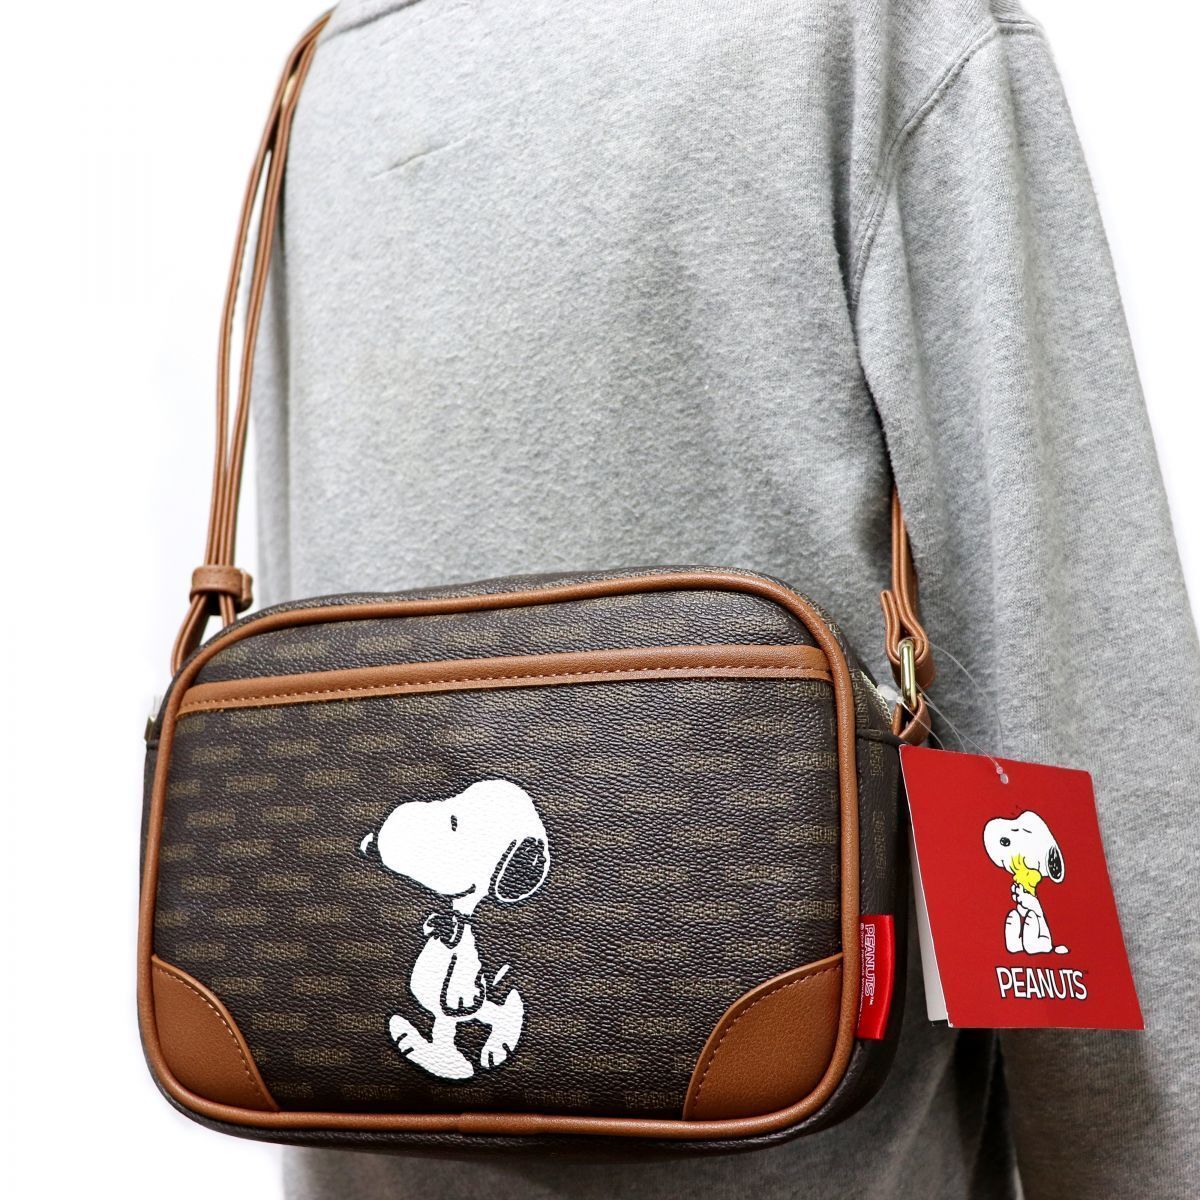 * Snoopy SNOOPY PEANUTS with translation popular feeling of luxury leather style leather style shoulder bag BAG bag [HM24] one six *QWER*